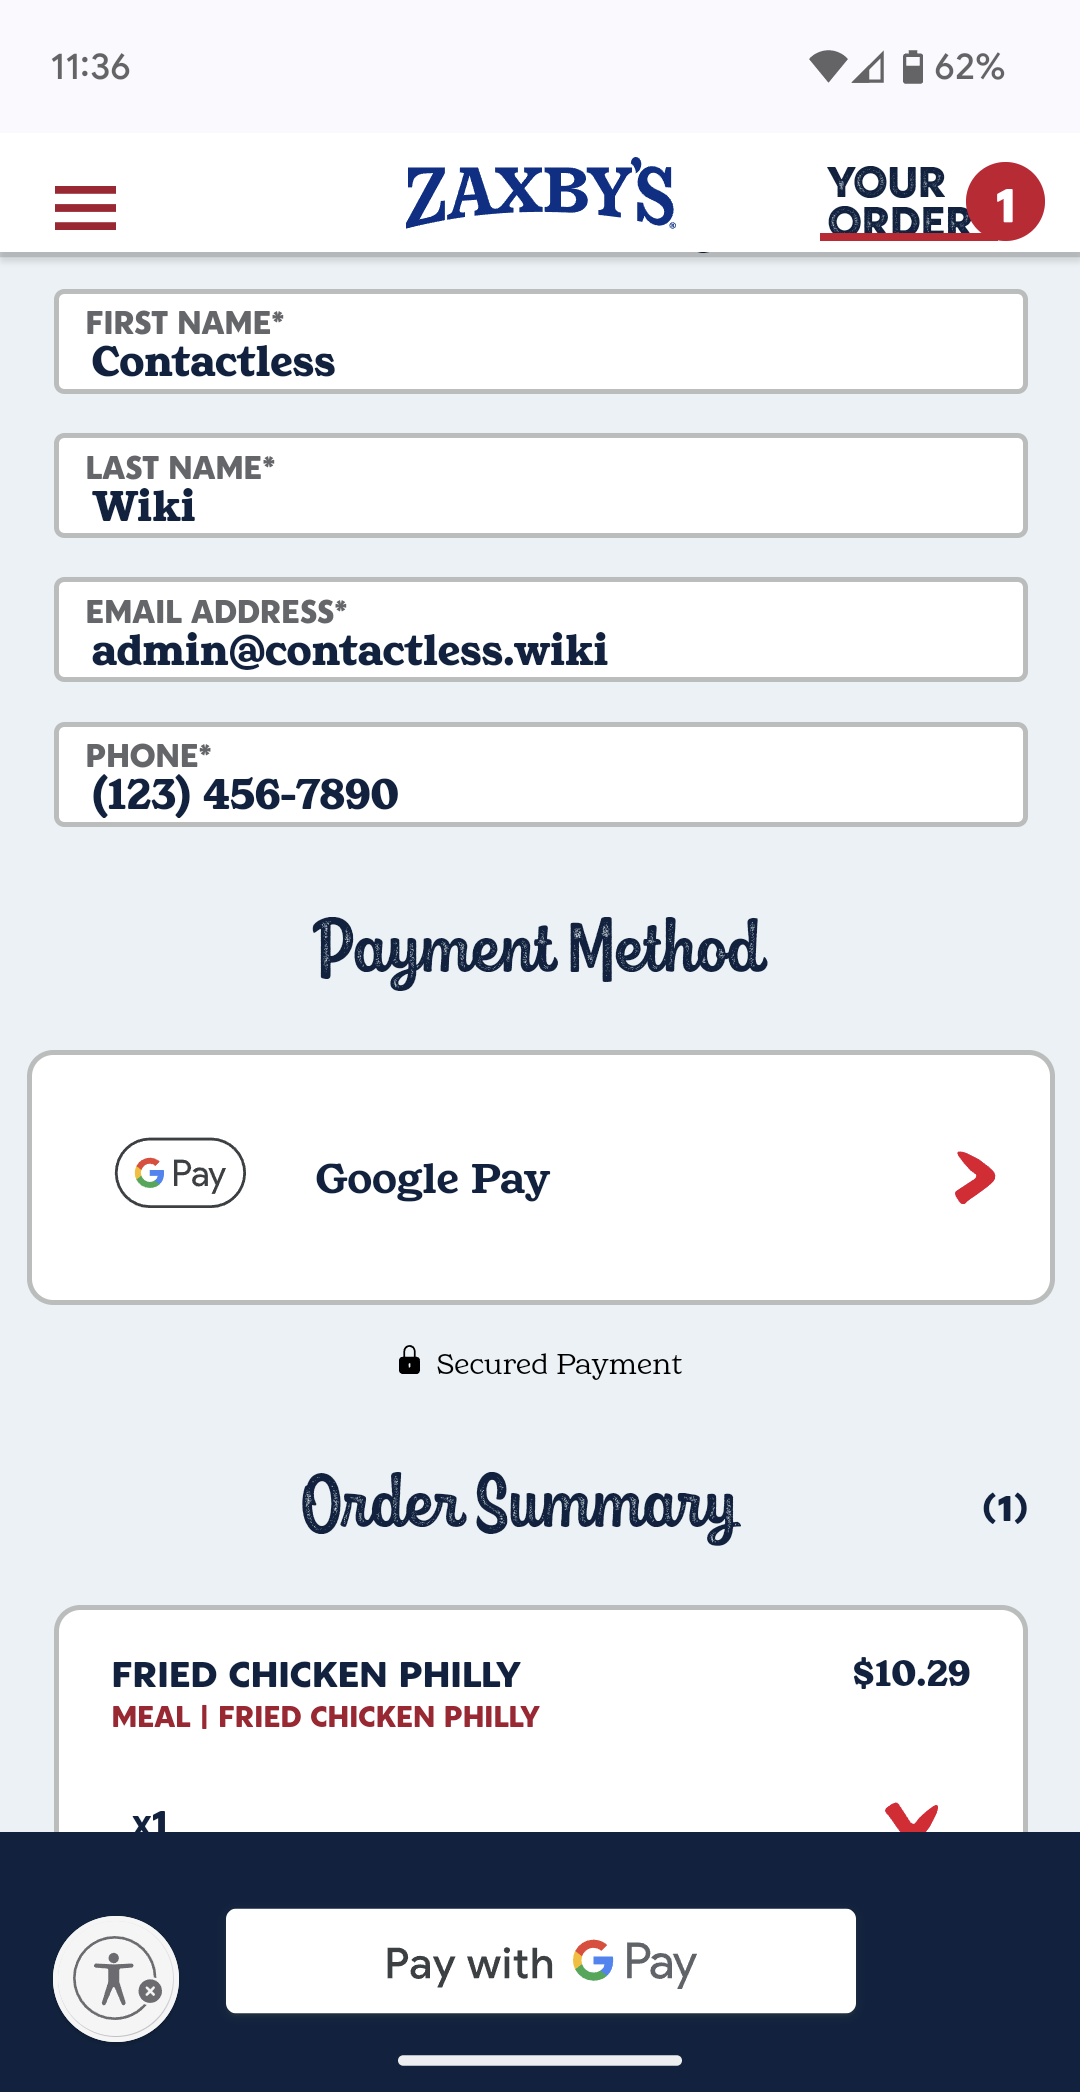 Zaxby's accepts Google Pay on its website.